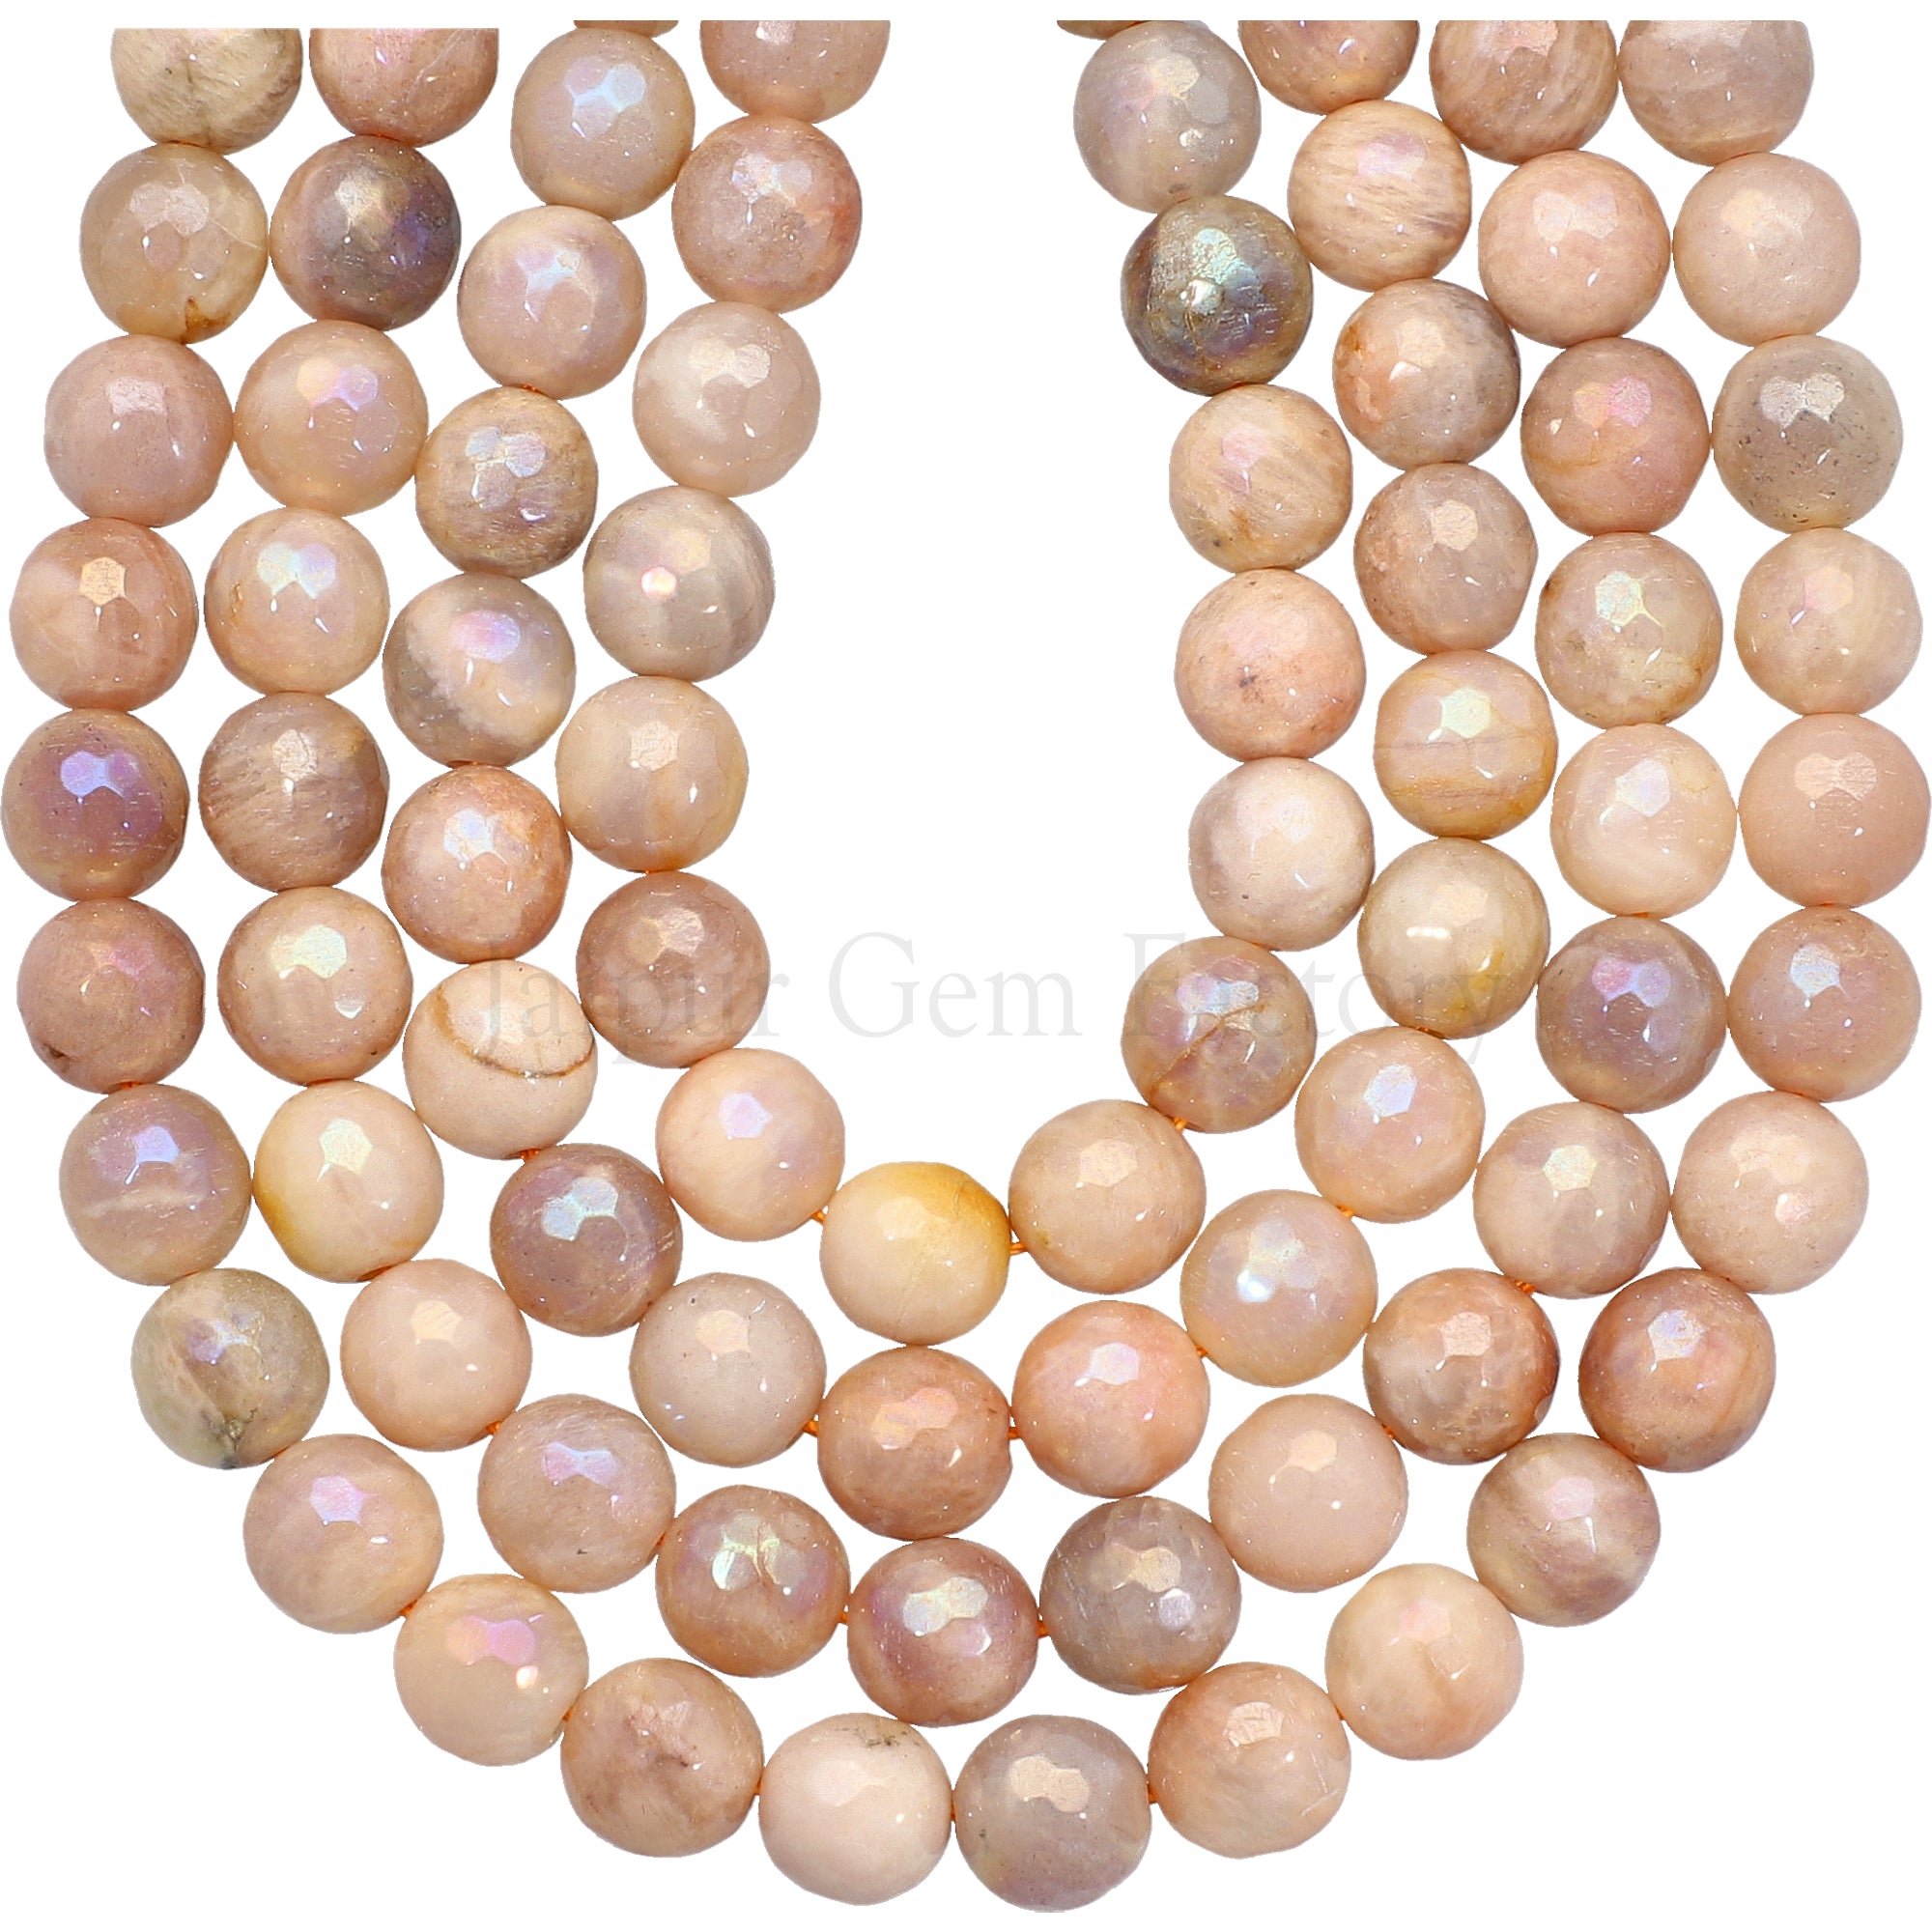 8 MM Mystic Coated Moonstone Faceted Round Beads 15 Inches Strand